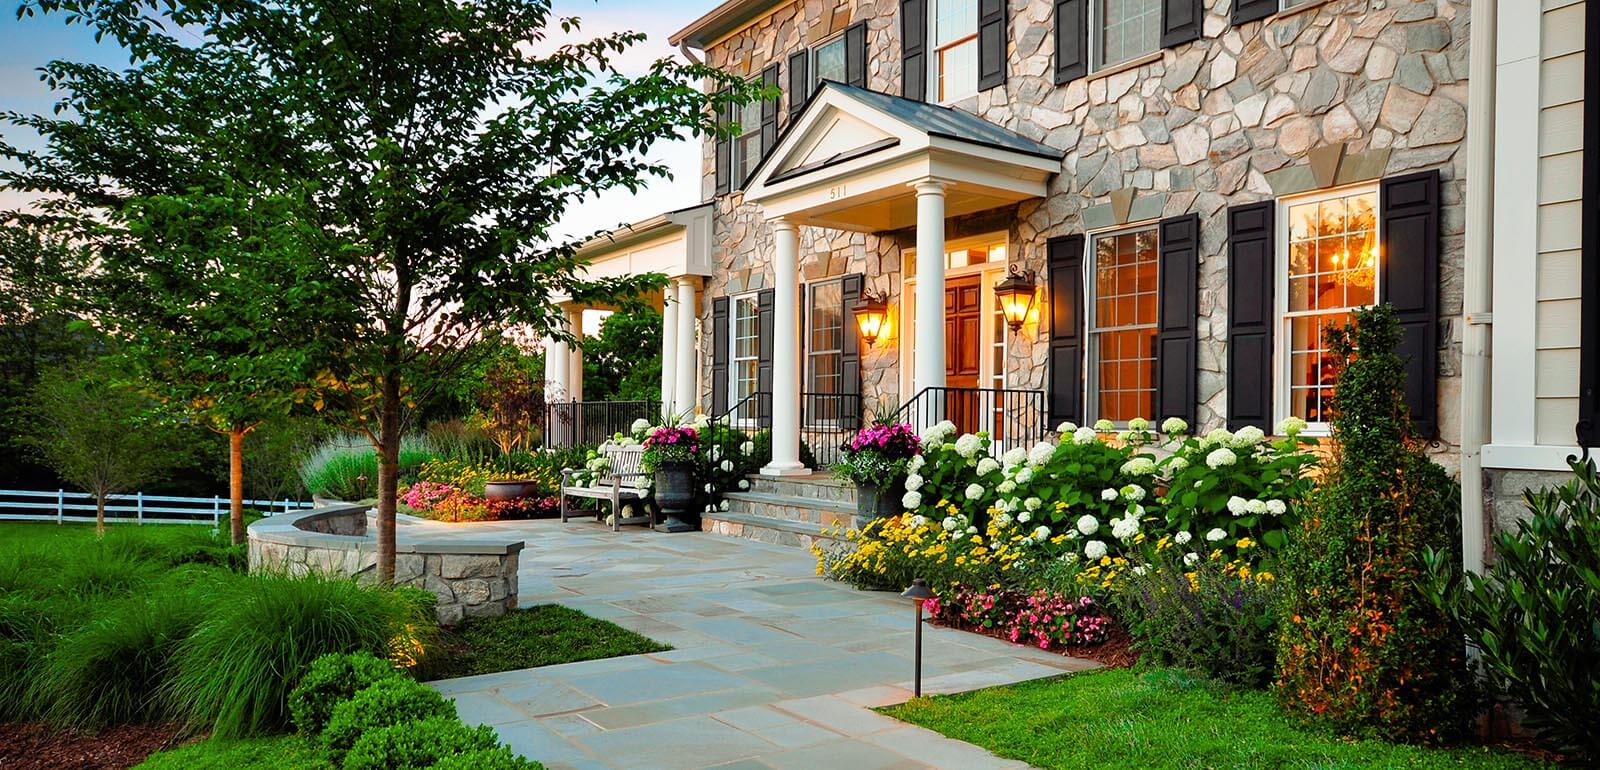 22 Most Beautiful Front Yard Landscaping Designs & Ideas ...